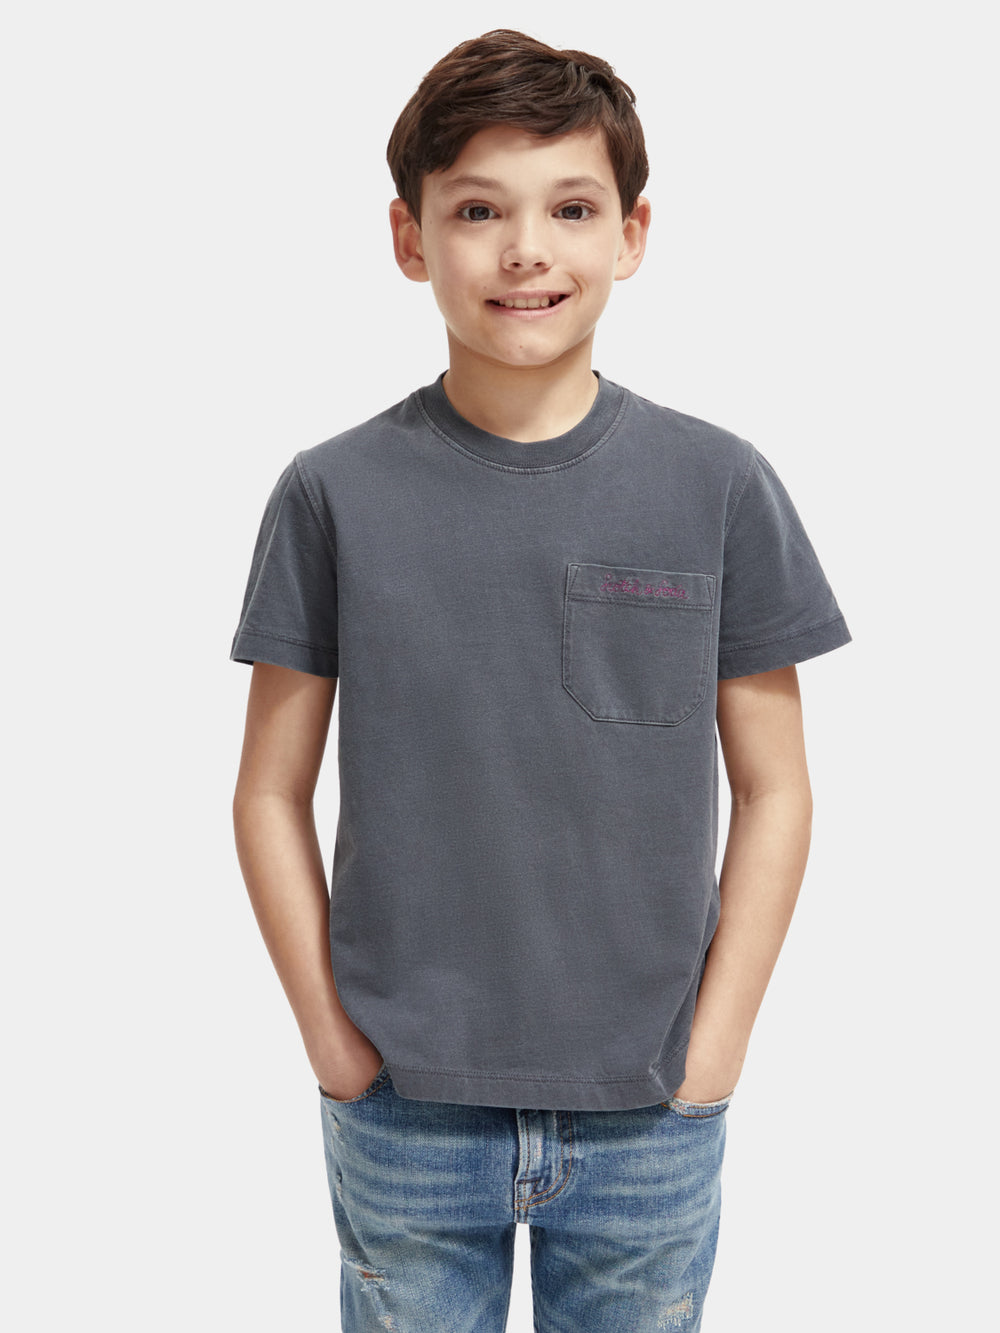 Kids - Relaxed-fit chest pocket t-shirt - Scotch & Soda AU